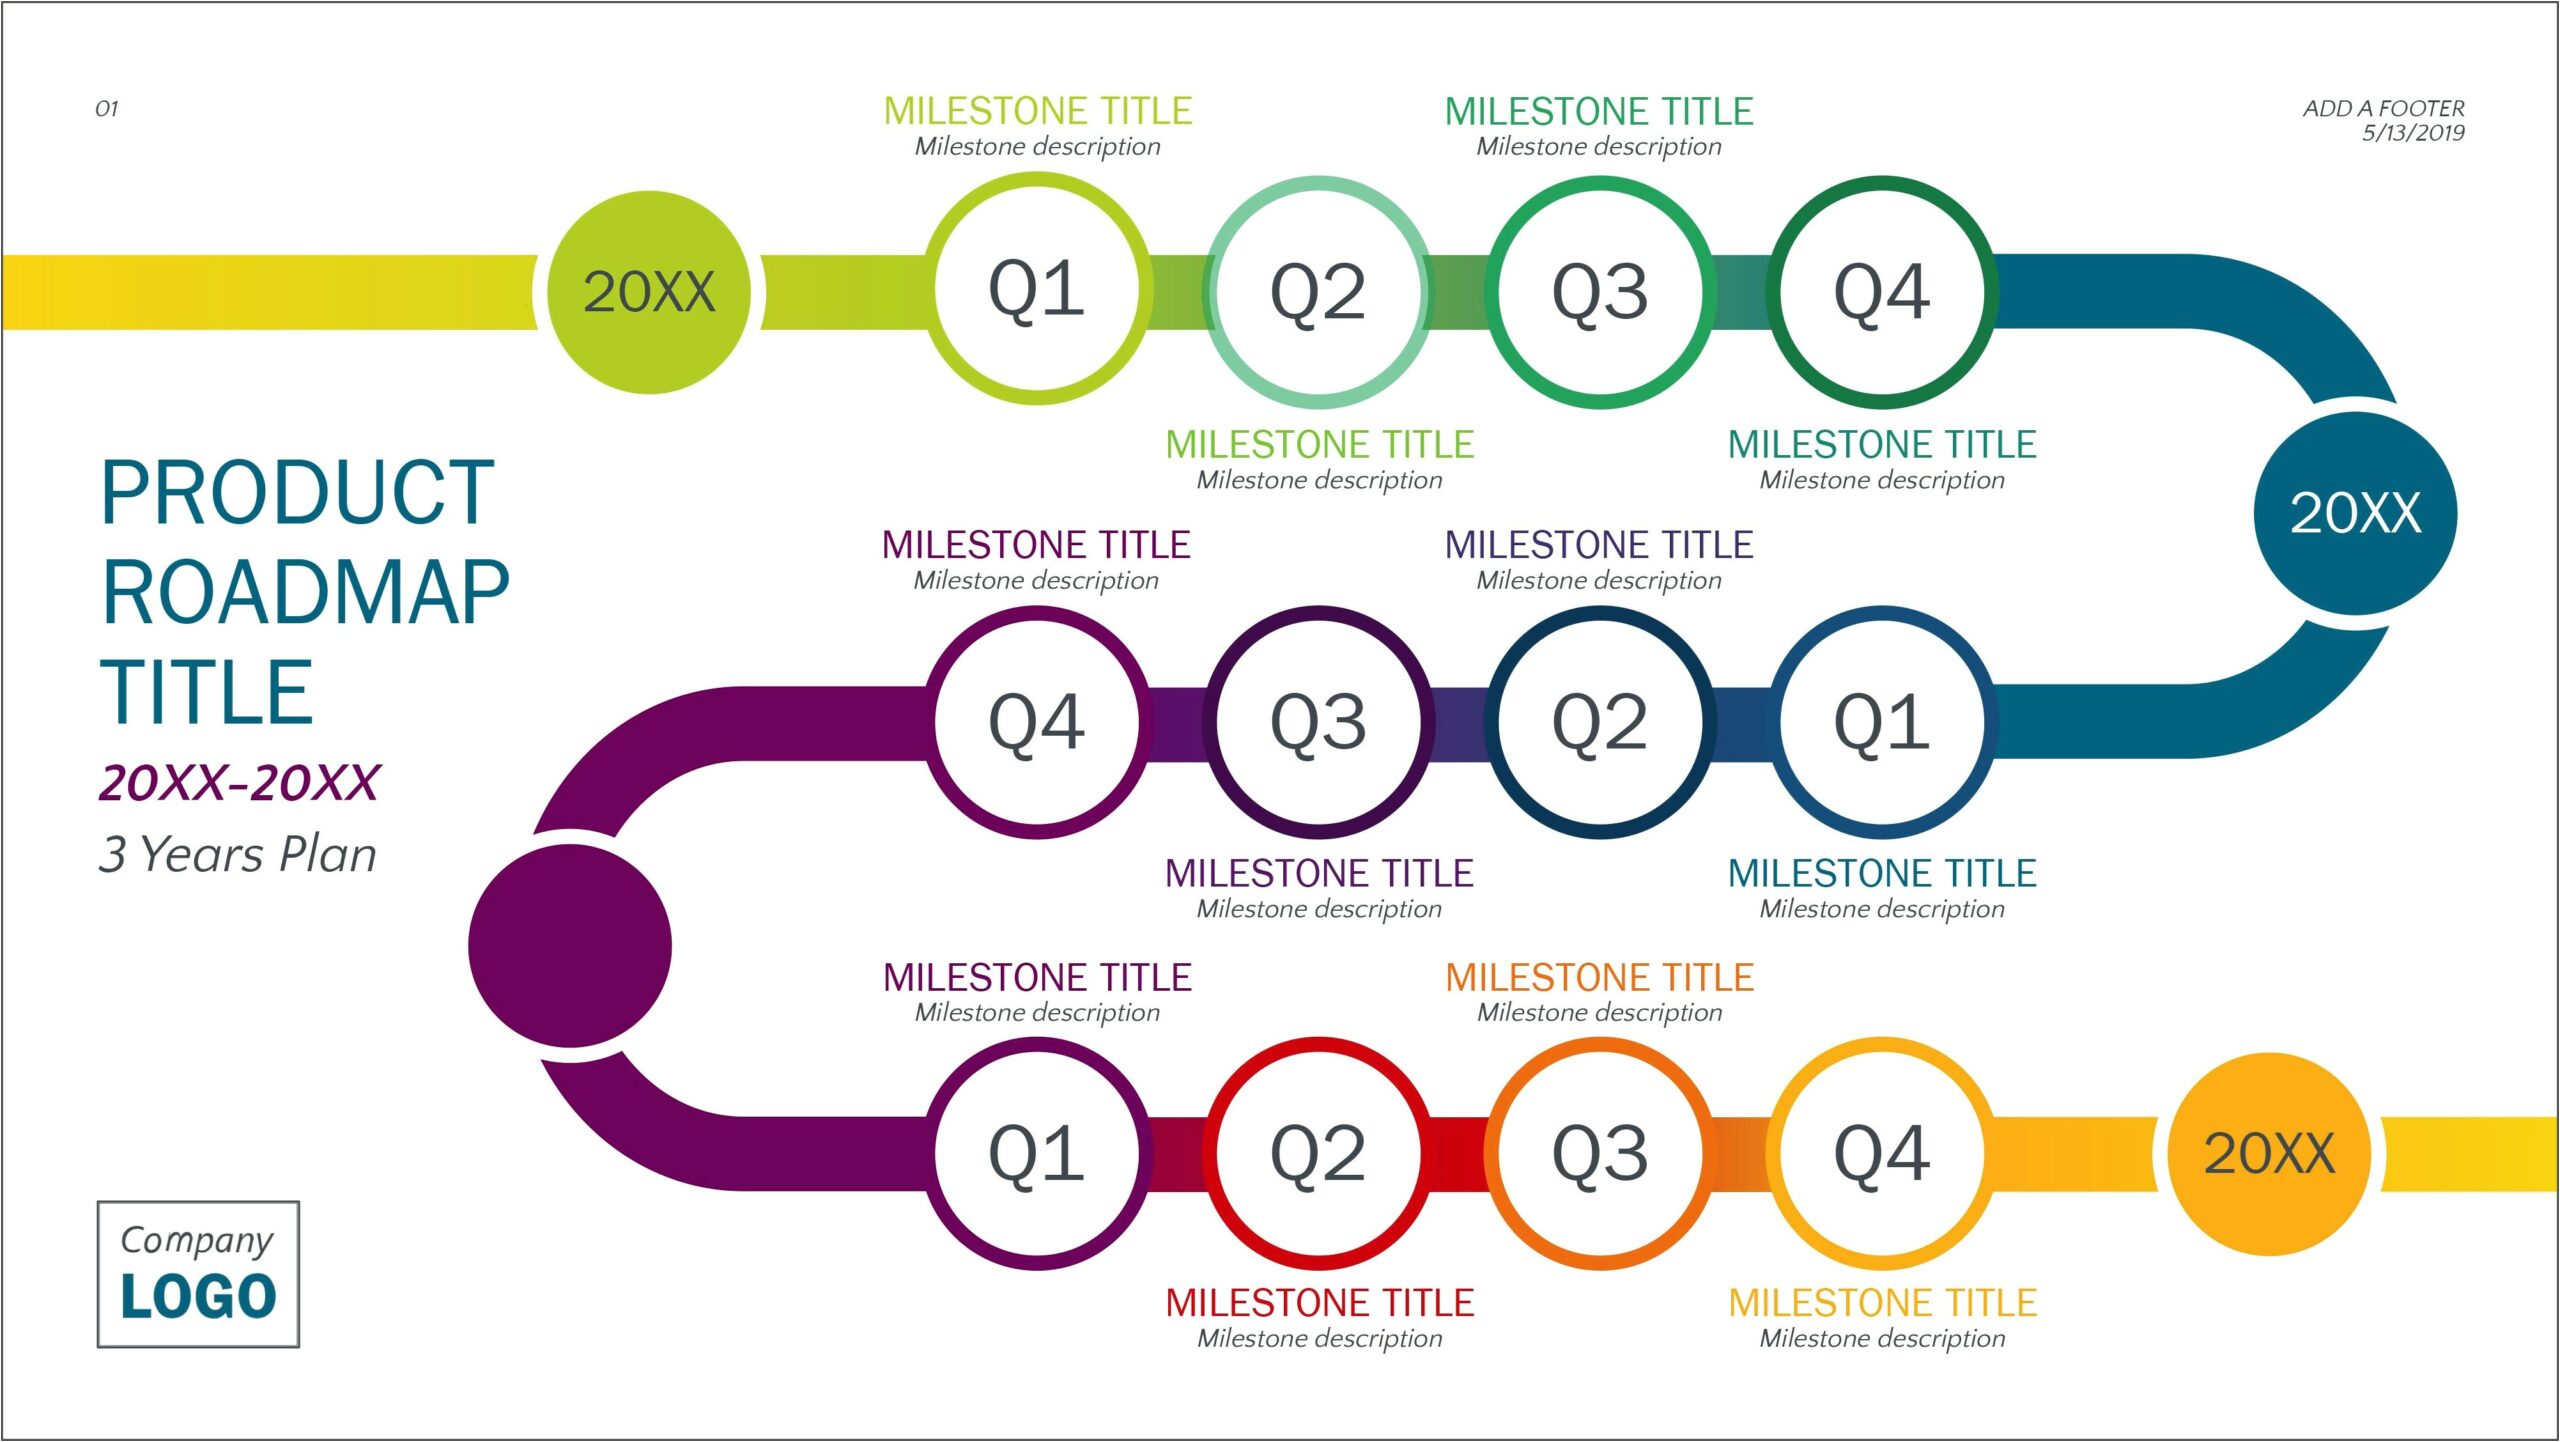 Free Project Timeline Template Excel 2010